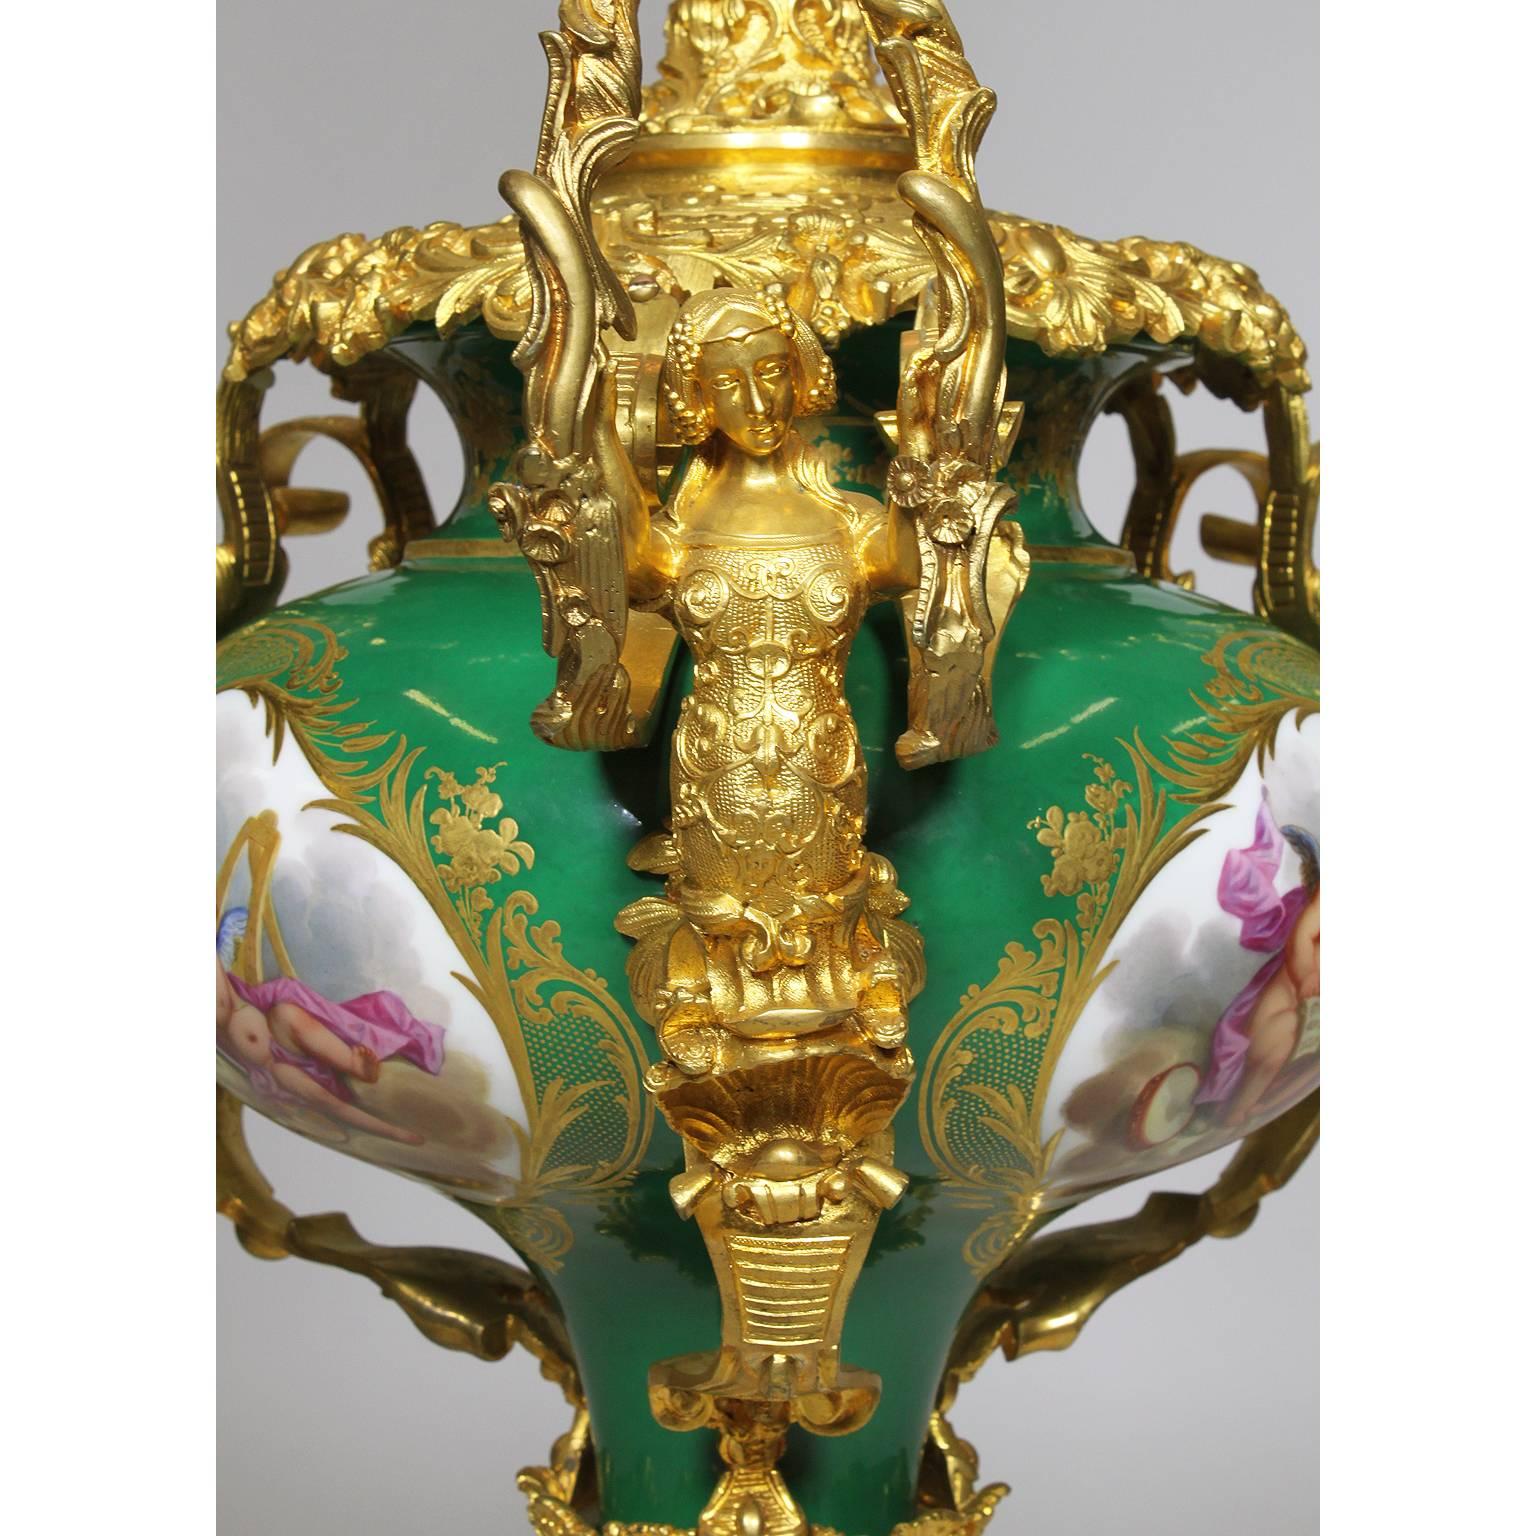 Gilt French 19th Century Figural Sevres Porcelain and Ormolu Mounted Hanging Lantern